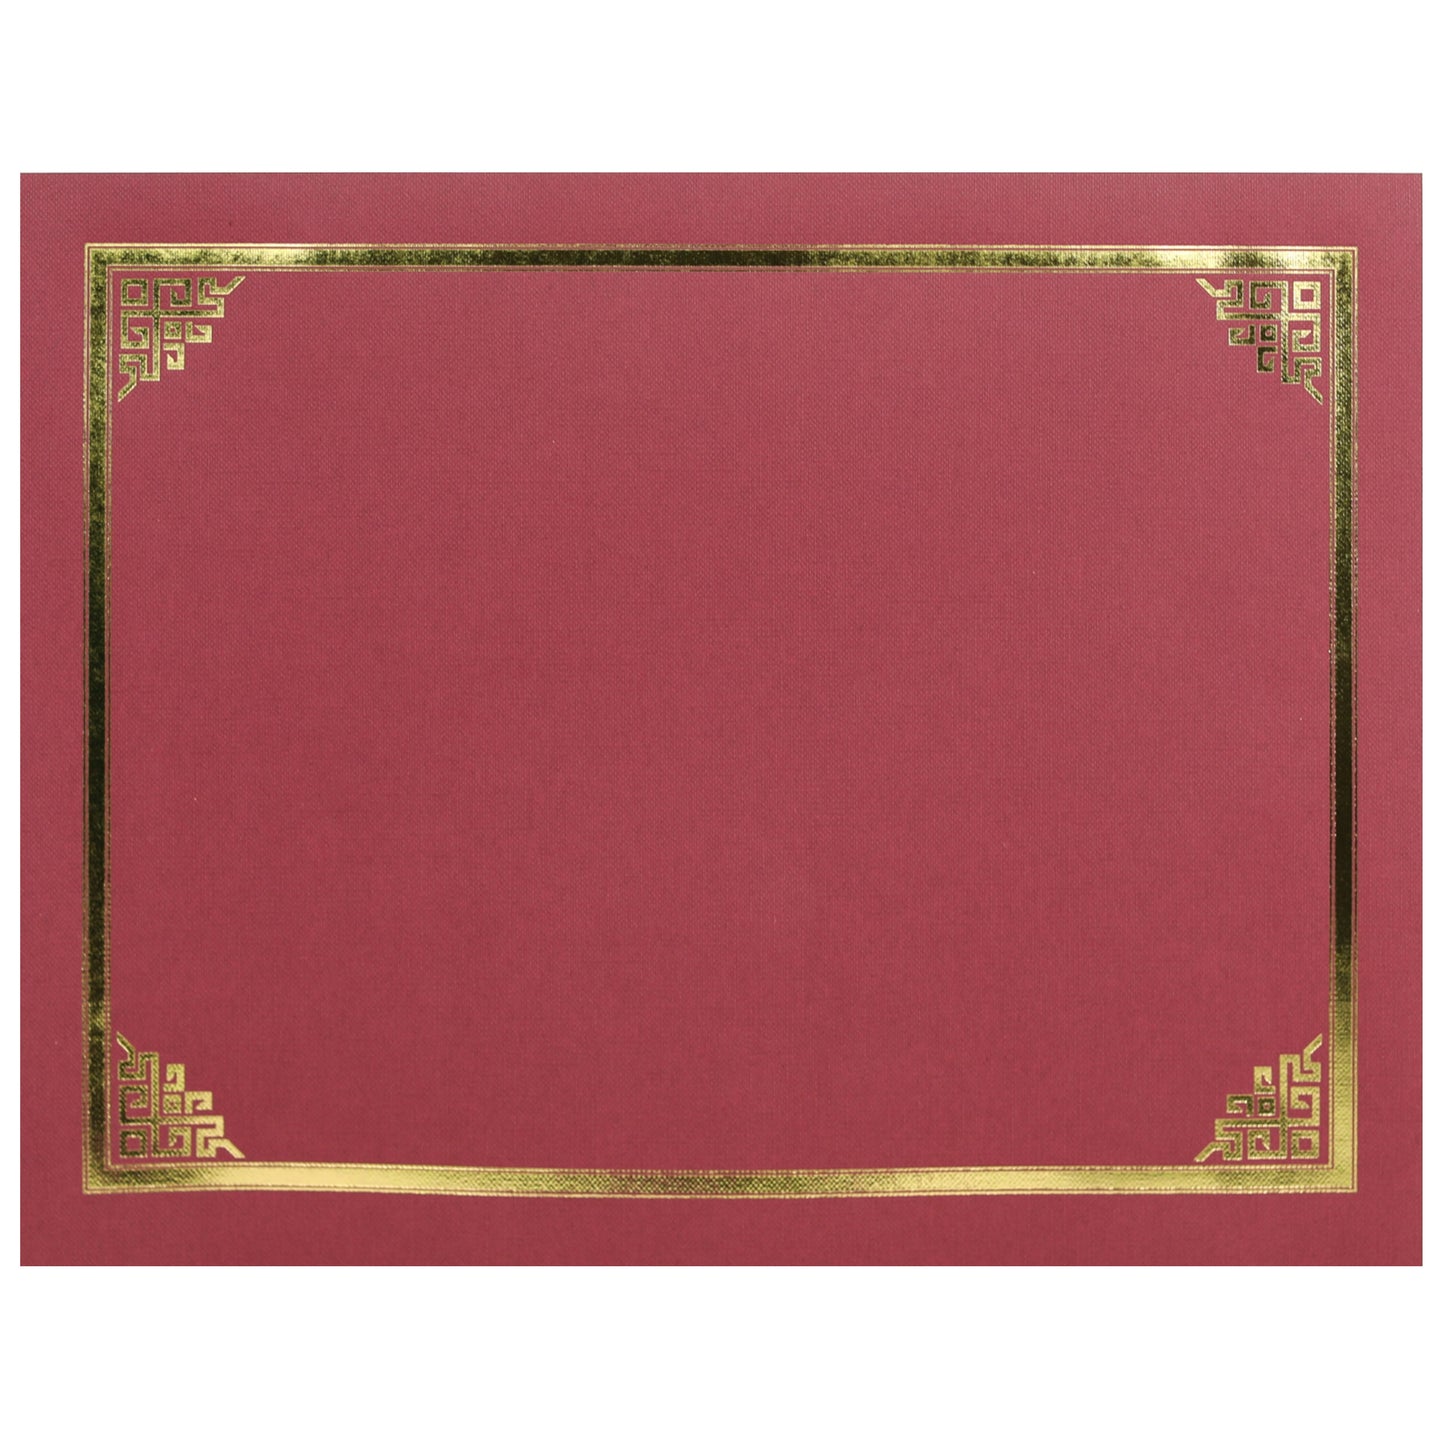 St. James® Certificate Holders/Document Covers/Diploma Holders, Red, Gold Foil Border, Linen Finish, Pack of 5, 83804